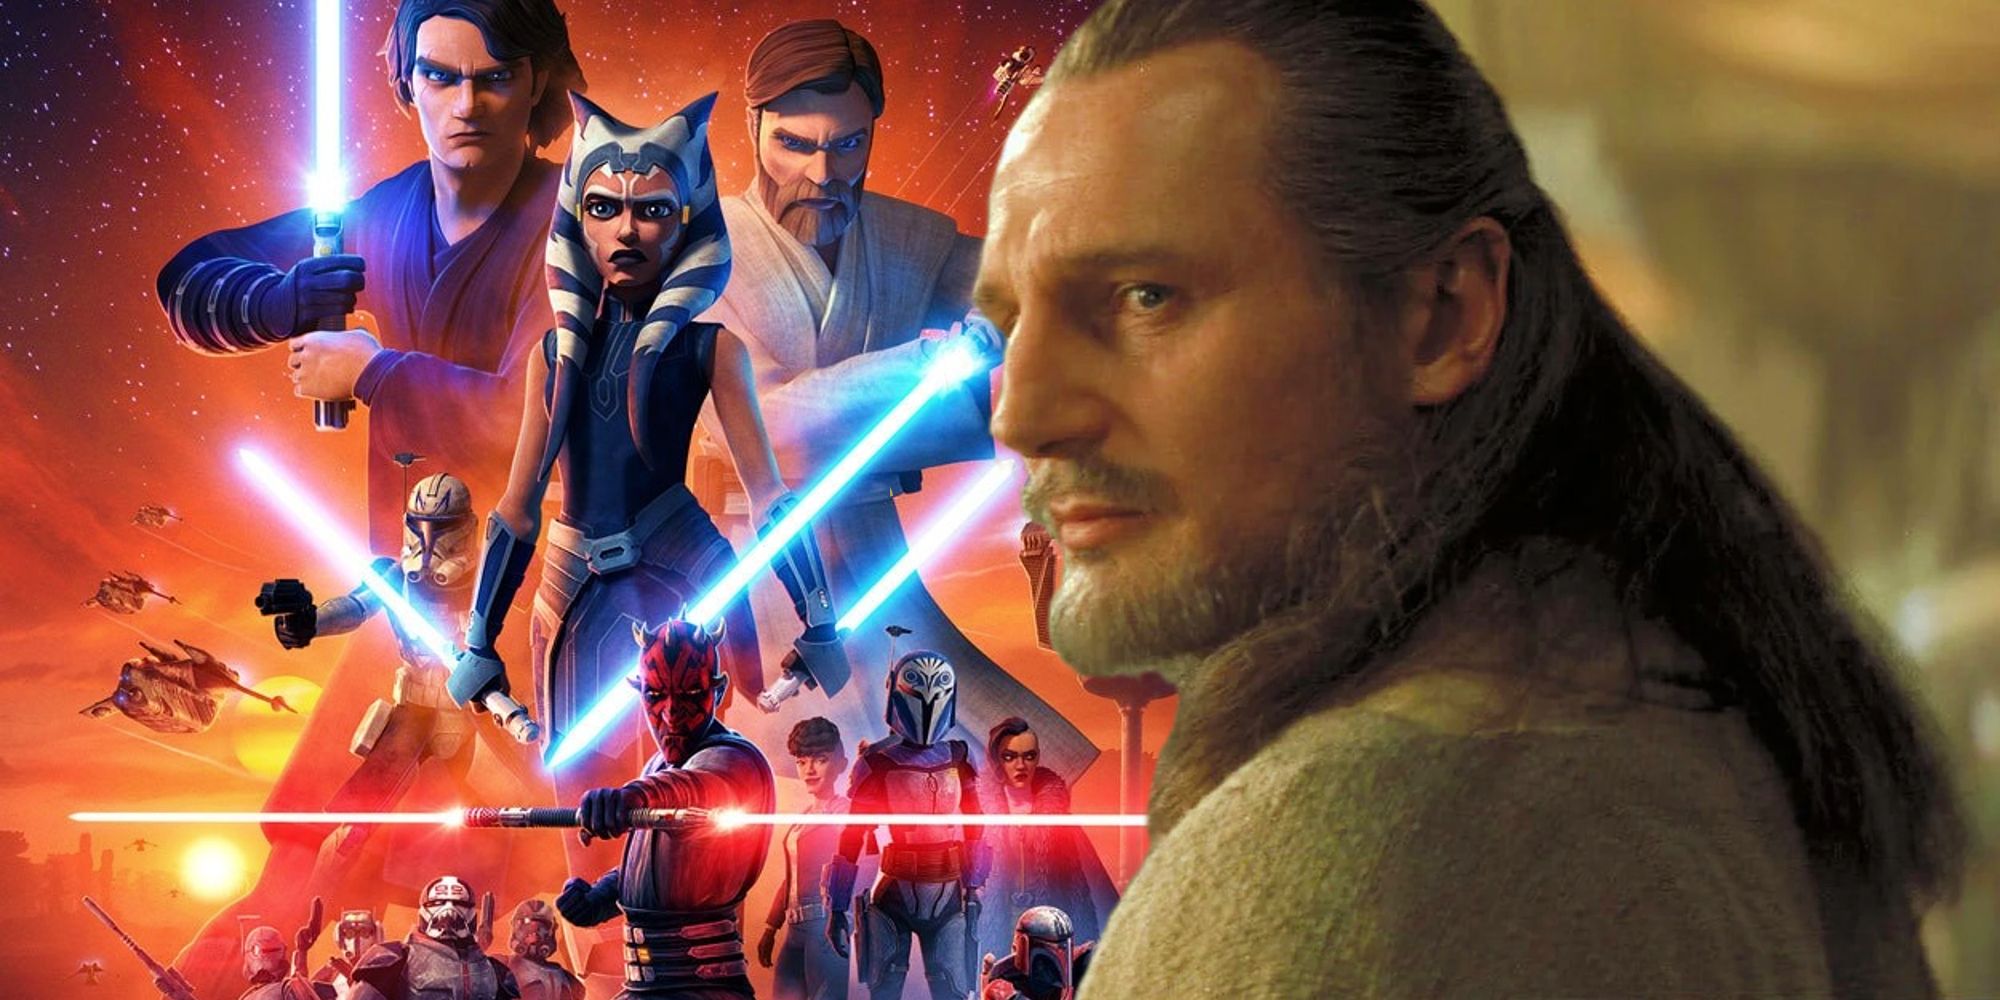 Qui-Gon Jinn looking over his shoulder in Star Wars: The Phantom Menace and the season 7 poster for Star Wars: The Clone Wars